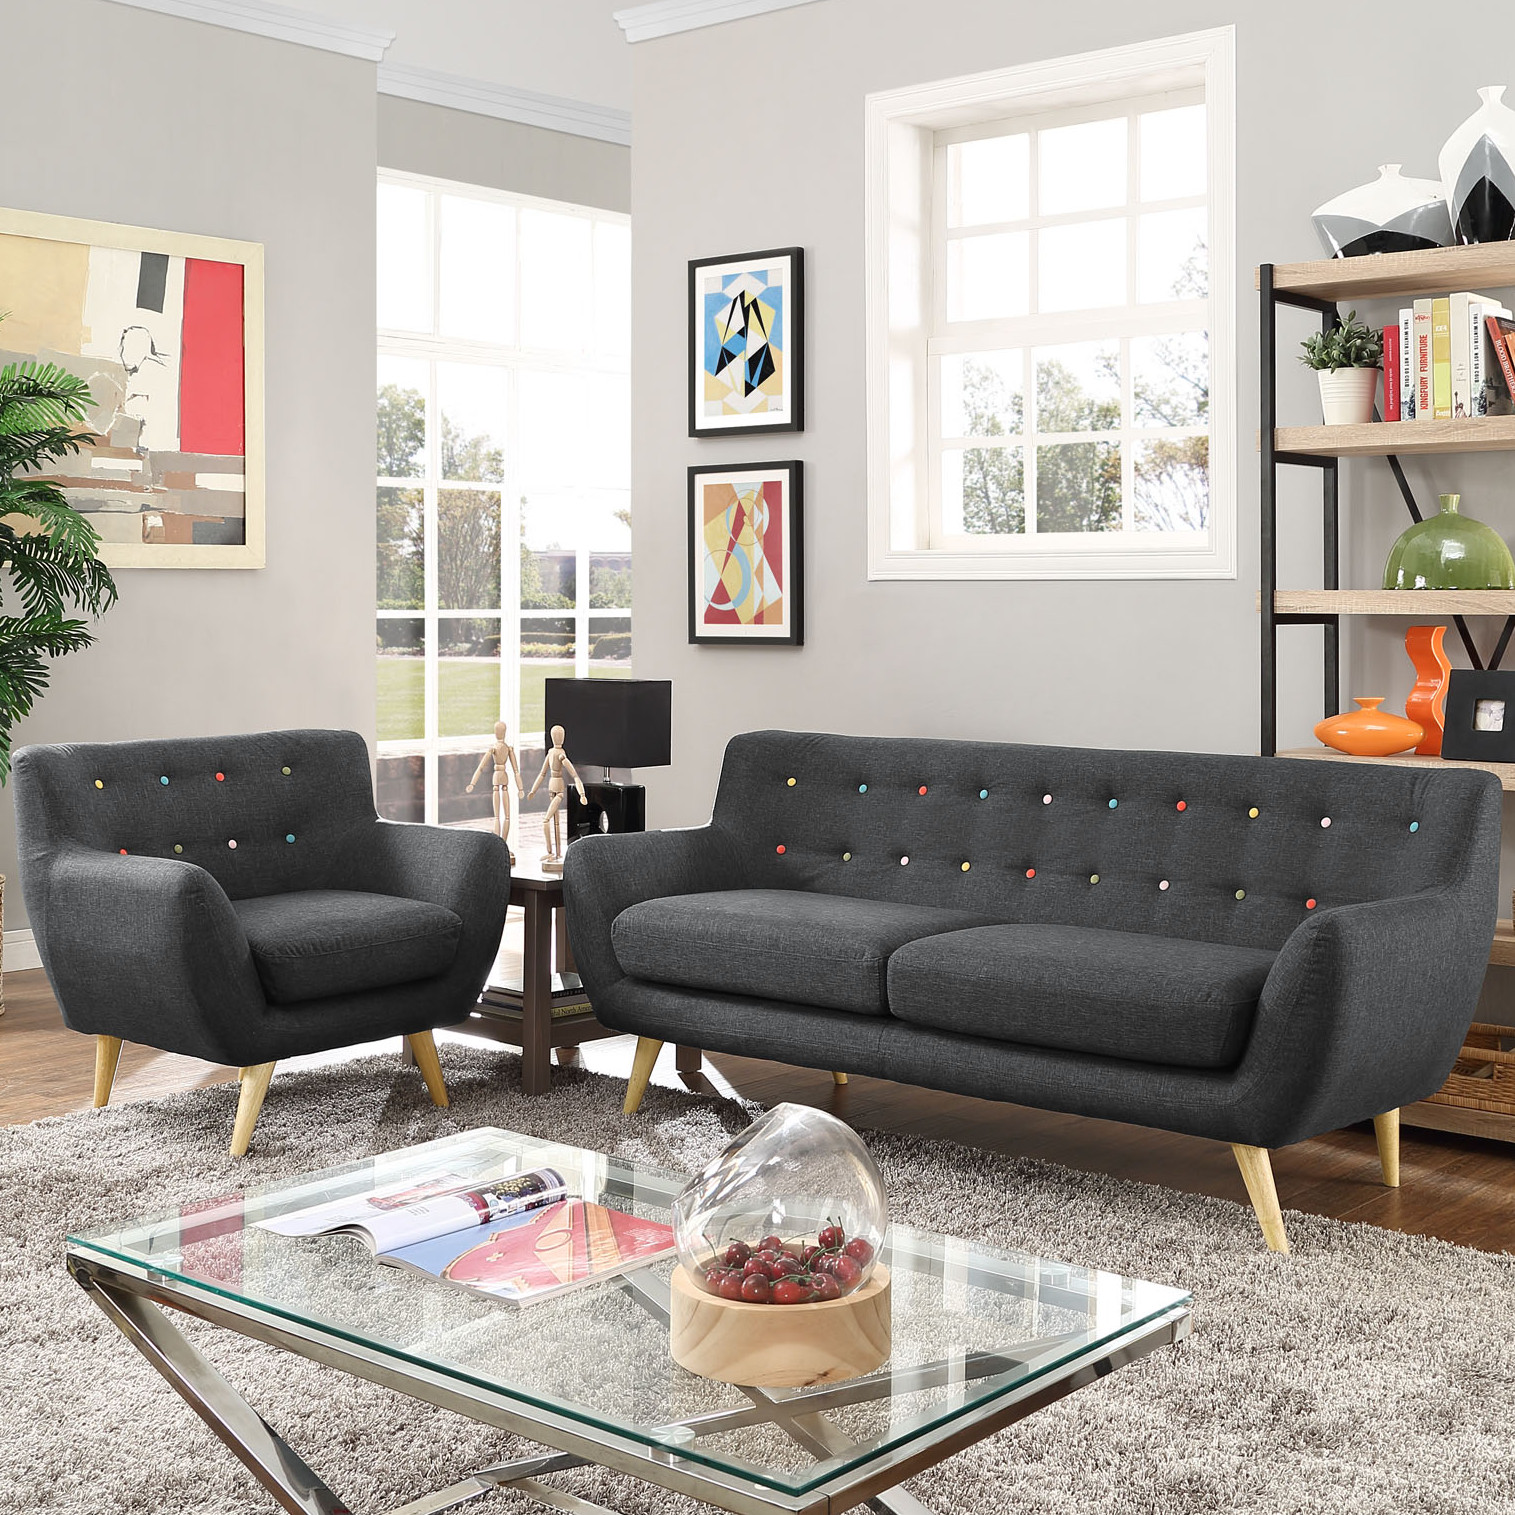 Modern Contemporary Living Room Furniture
 Modern & Contemporary Living Room Furniture